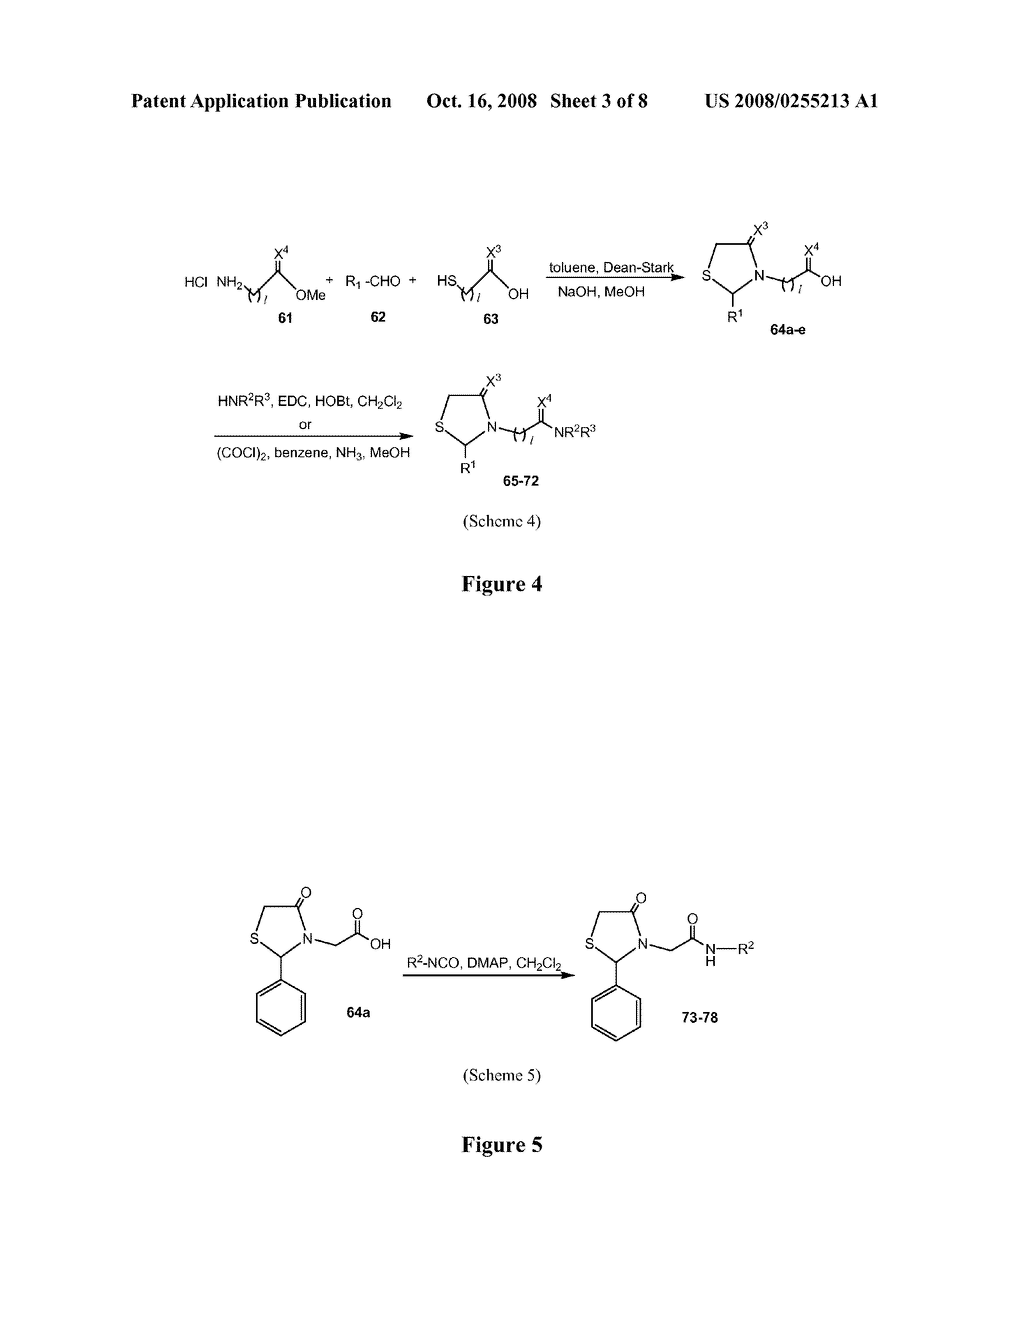 THIAZOLIDINONE AMIDES, THIAZOLIDINE CARBOXYLIC ACID AMIDES, AND SERINE AMIDES, INCLUDING POLYAMINE CONJUGATES THEREOF, AS SELECTIVE ANTI-CANCER AGENTS - diagram, schematic, and image 04